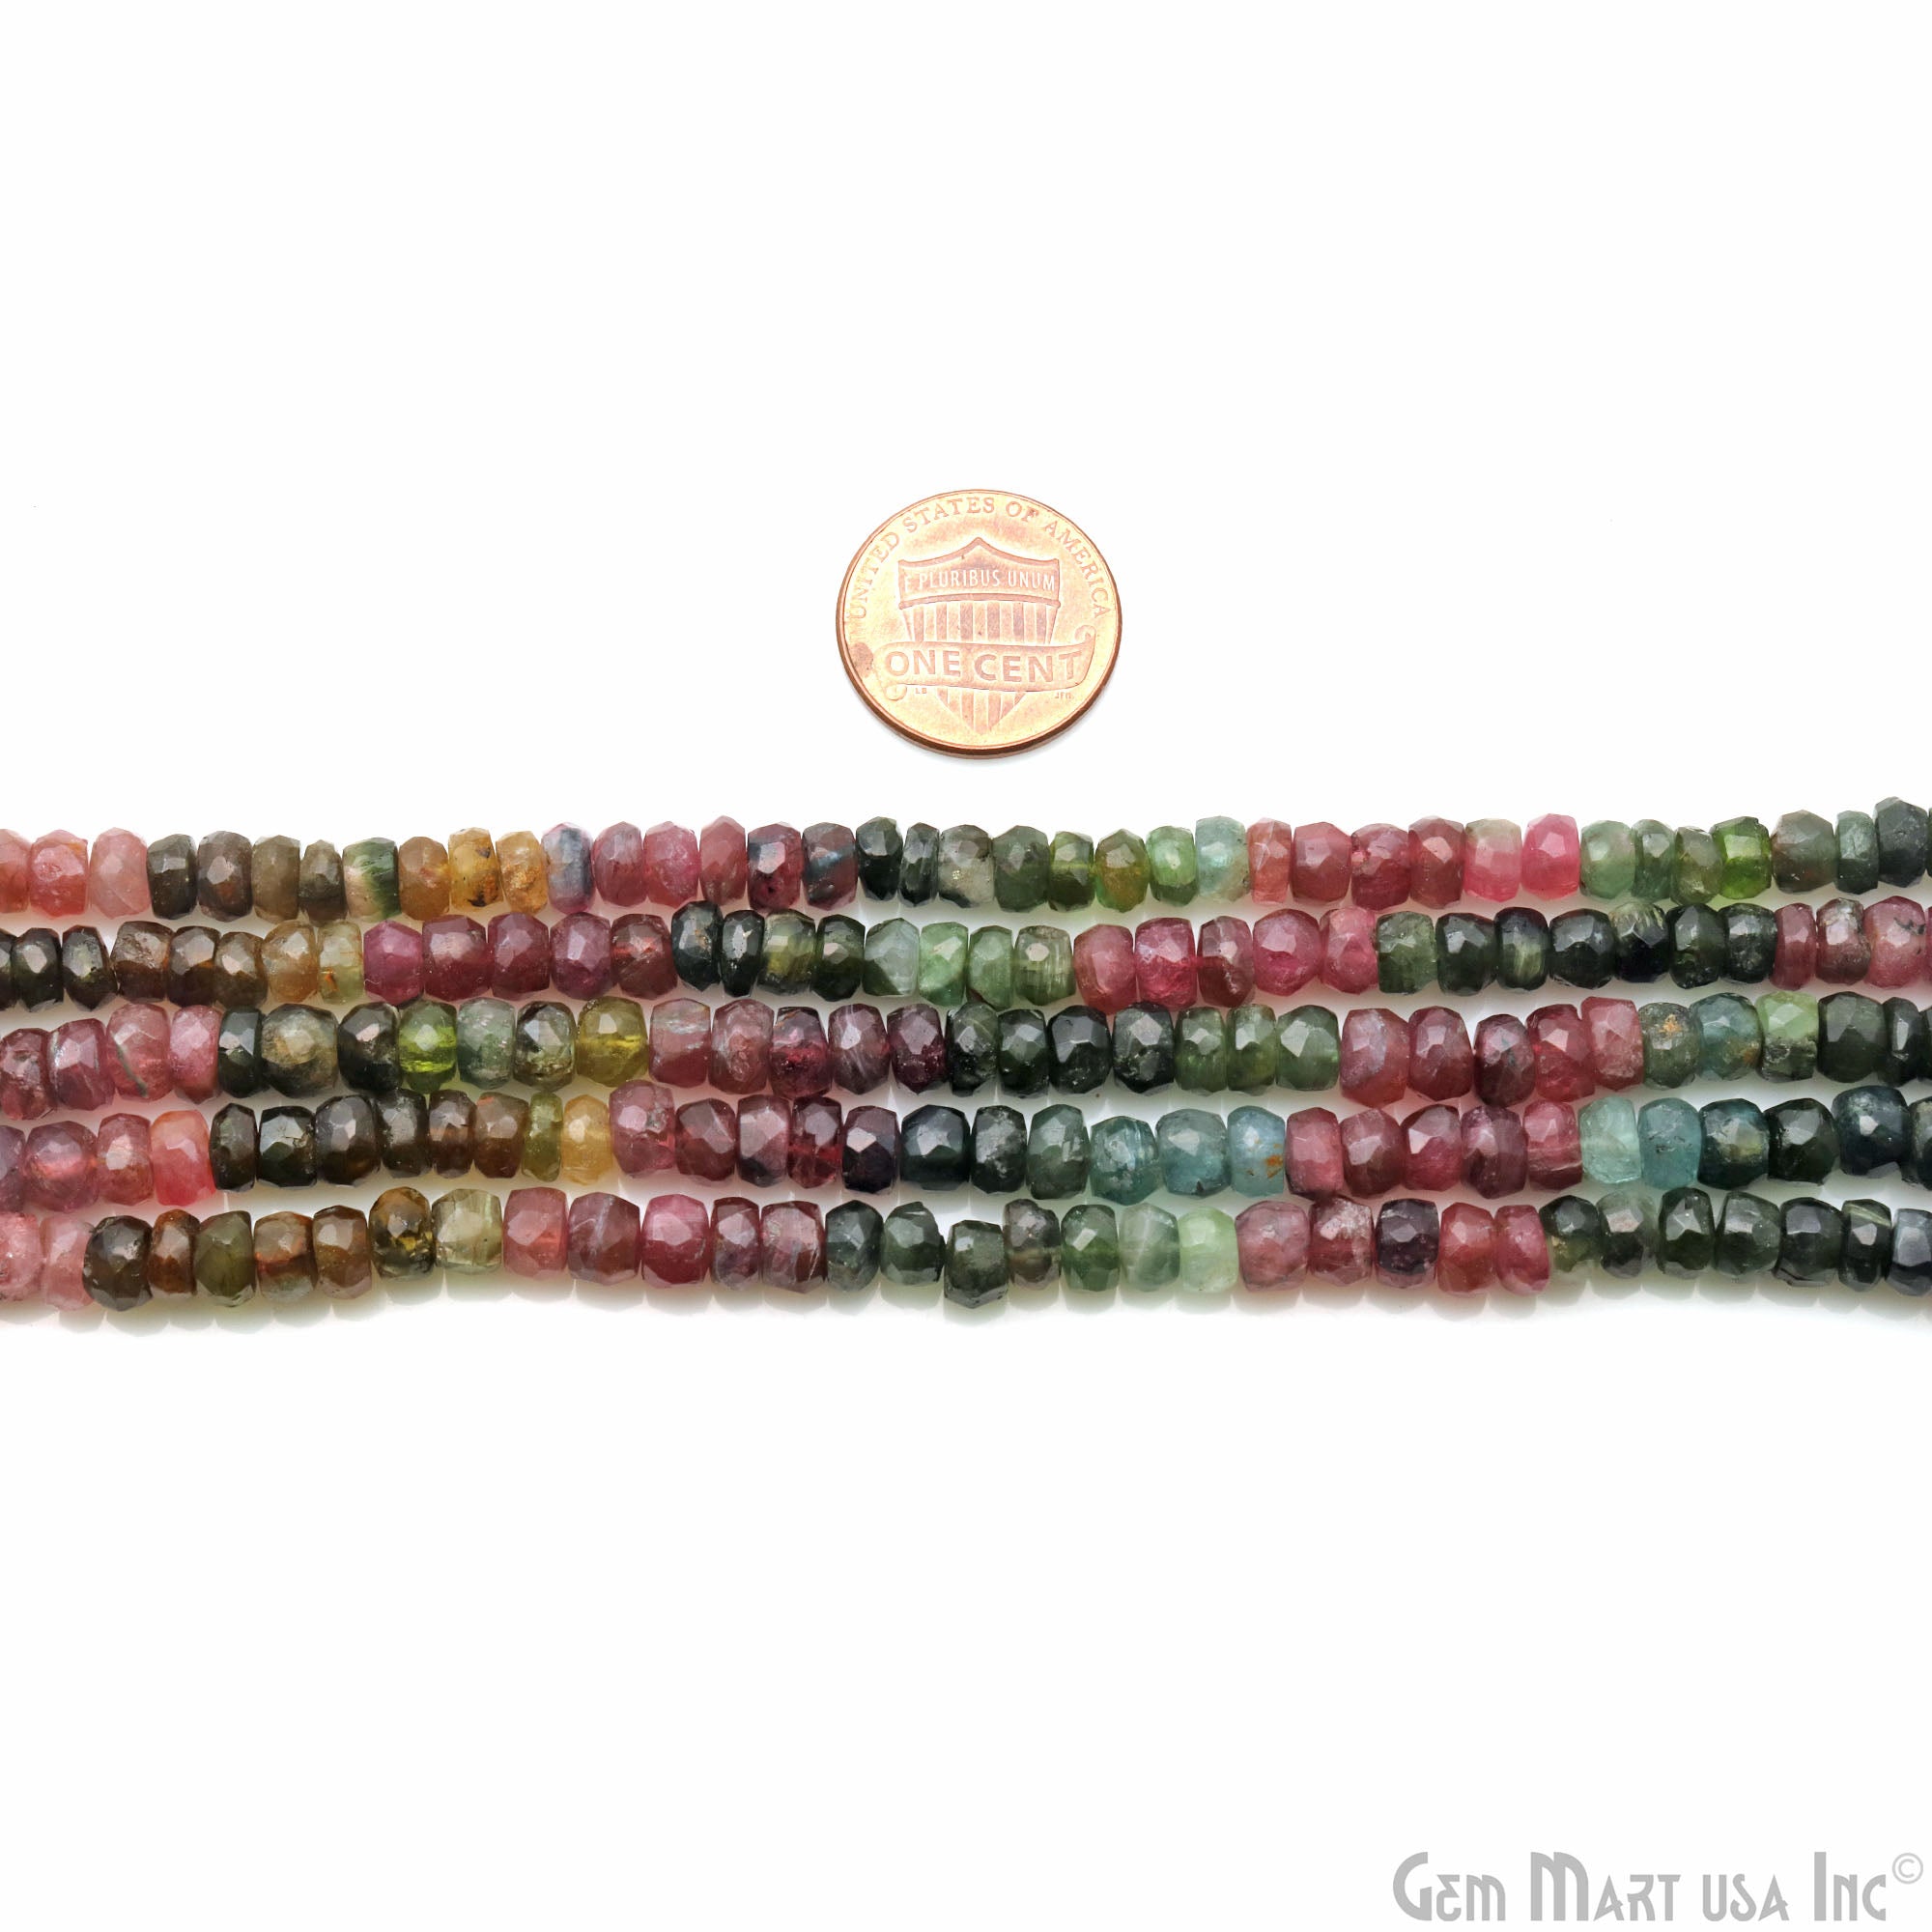 Multi Tourmaline Faceted 6-7mm Gemstone Beads Rondelle Strand 14"